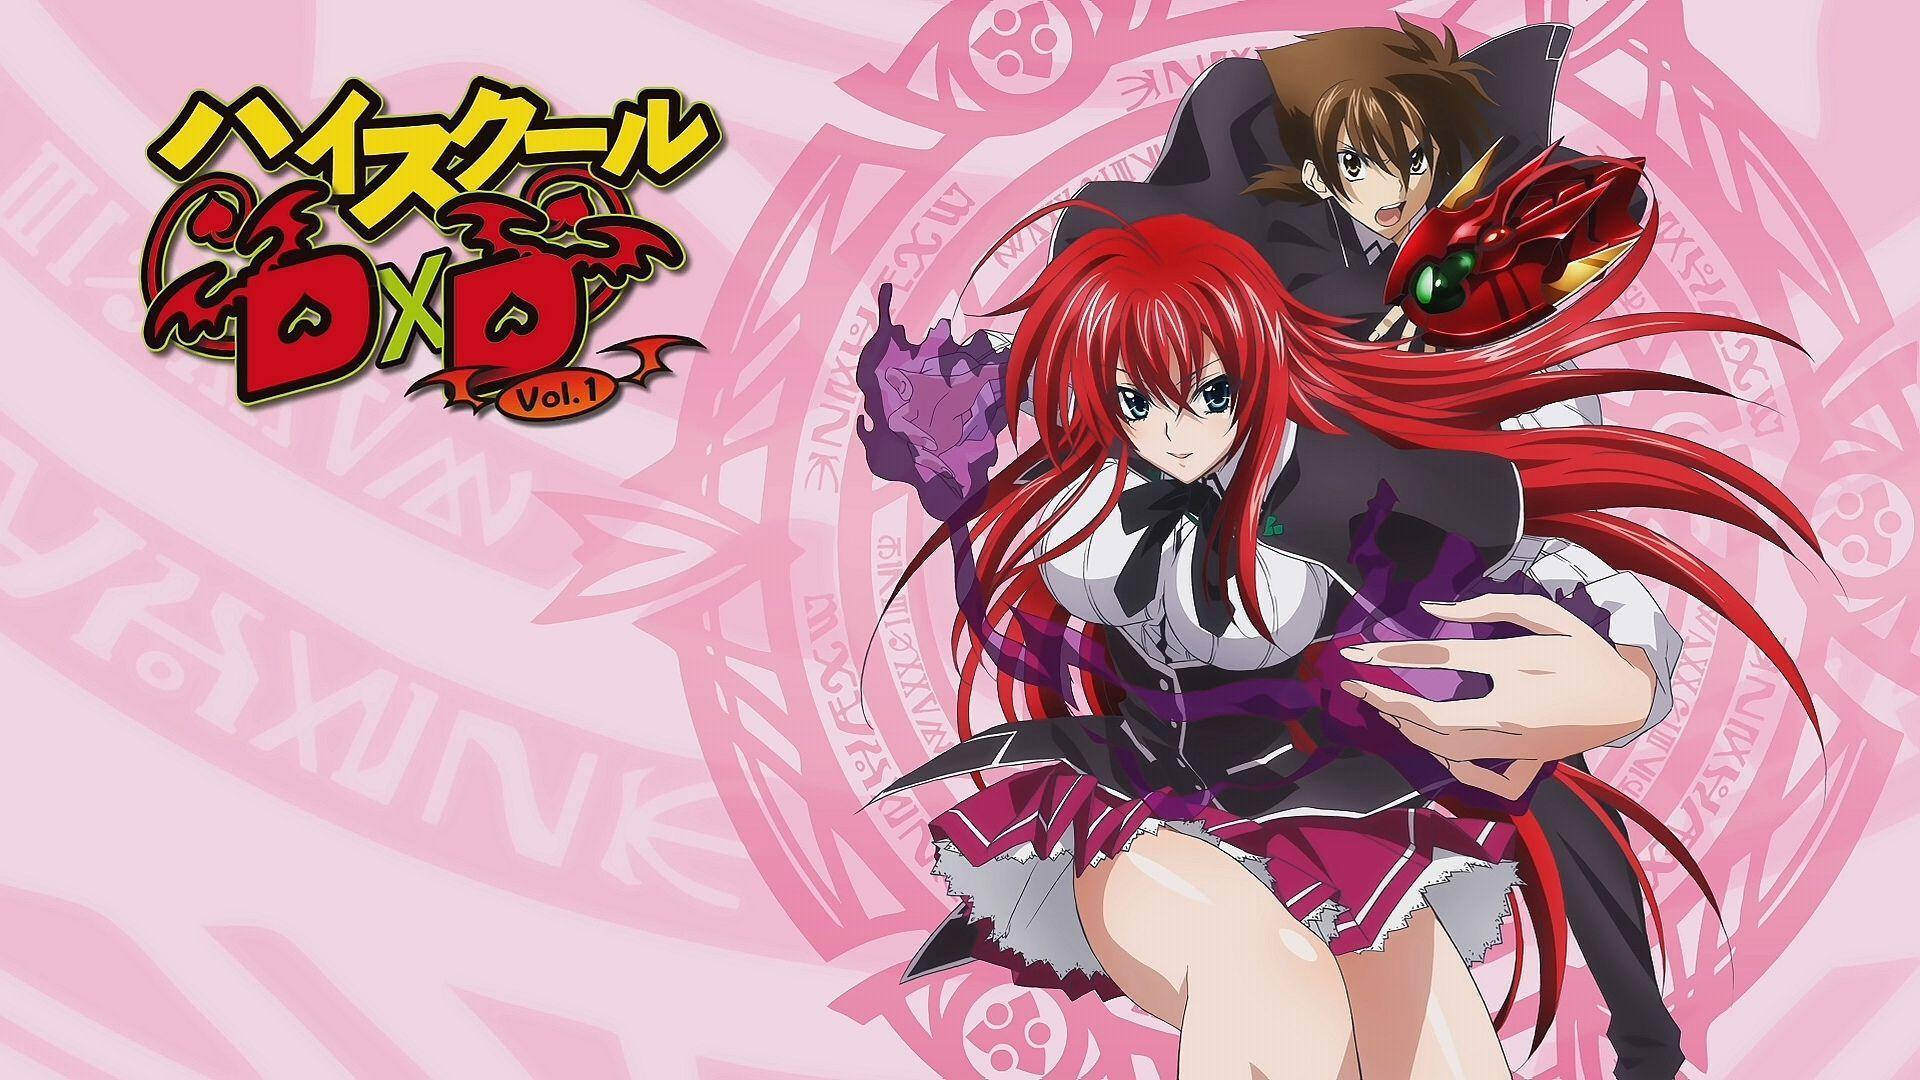 Rias and Issei from Highschool DxD Wallpaper